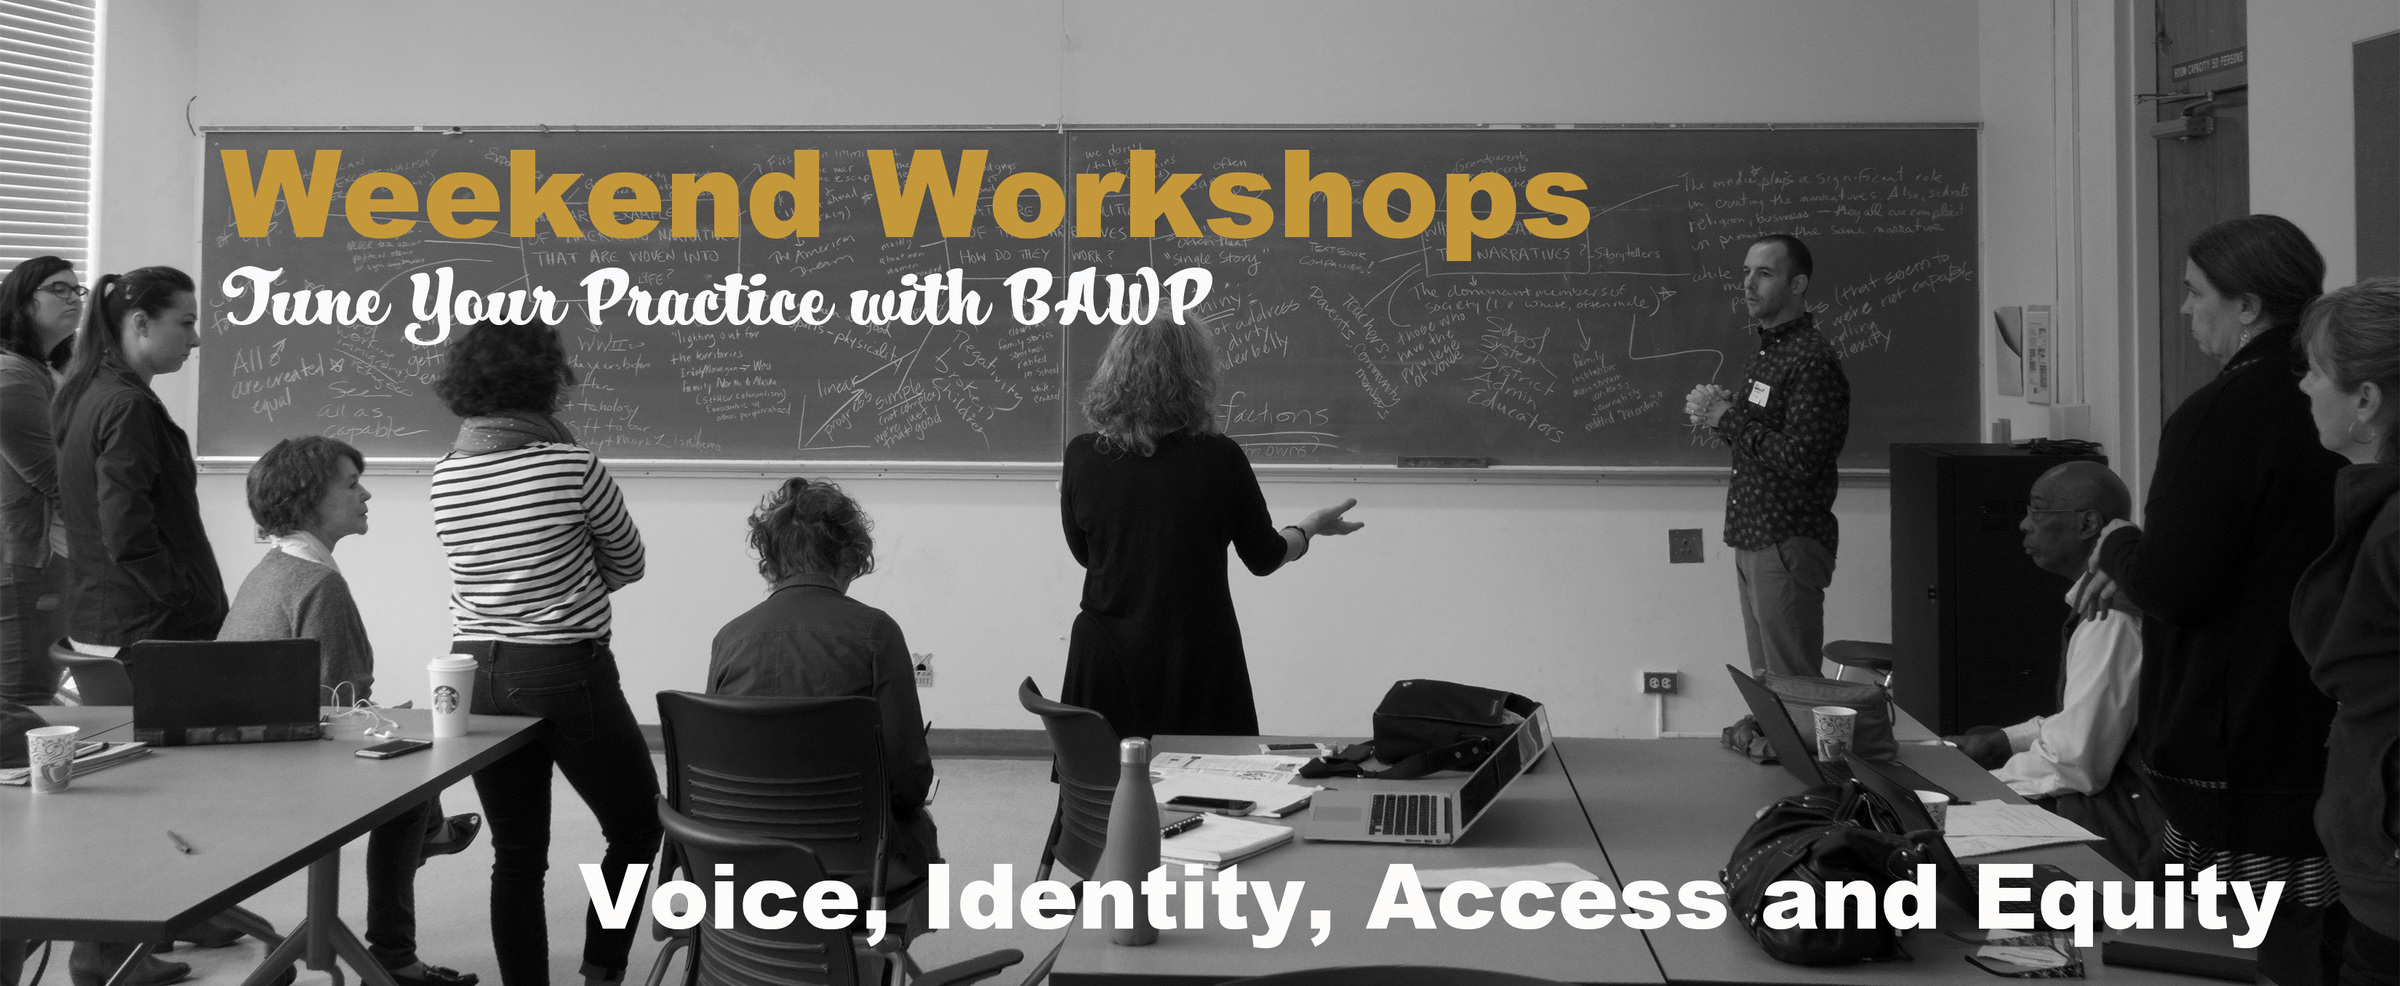 Weekend Workshops: Voice, Identity, Access and Equity